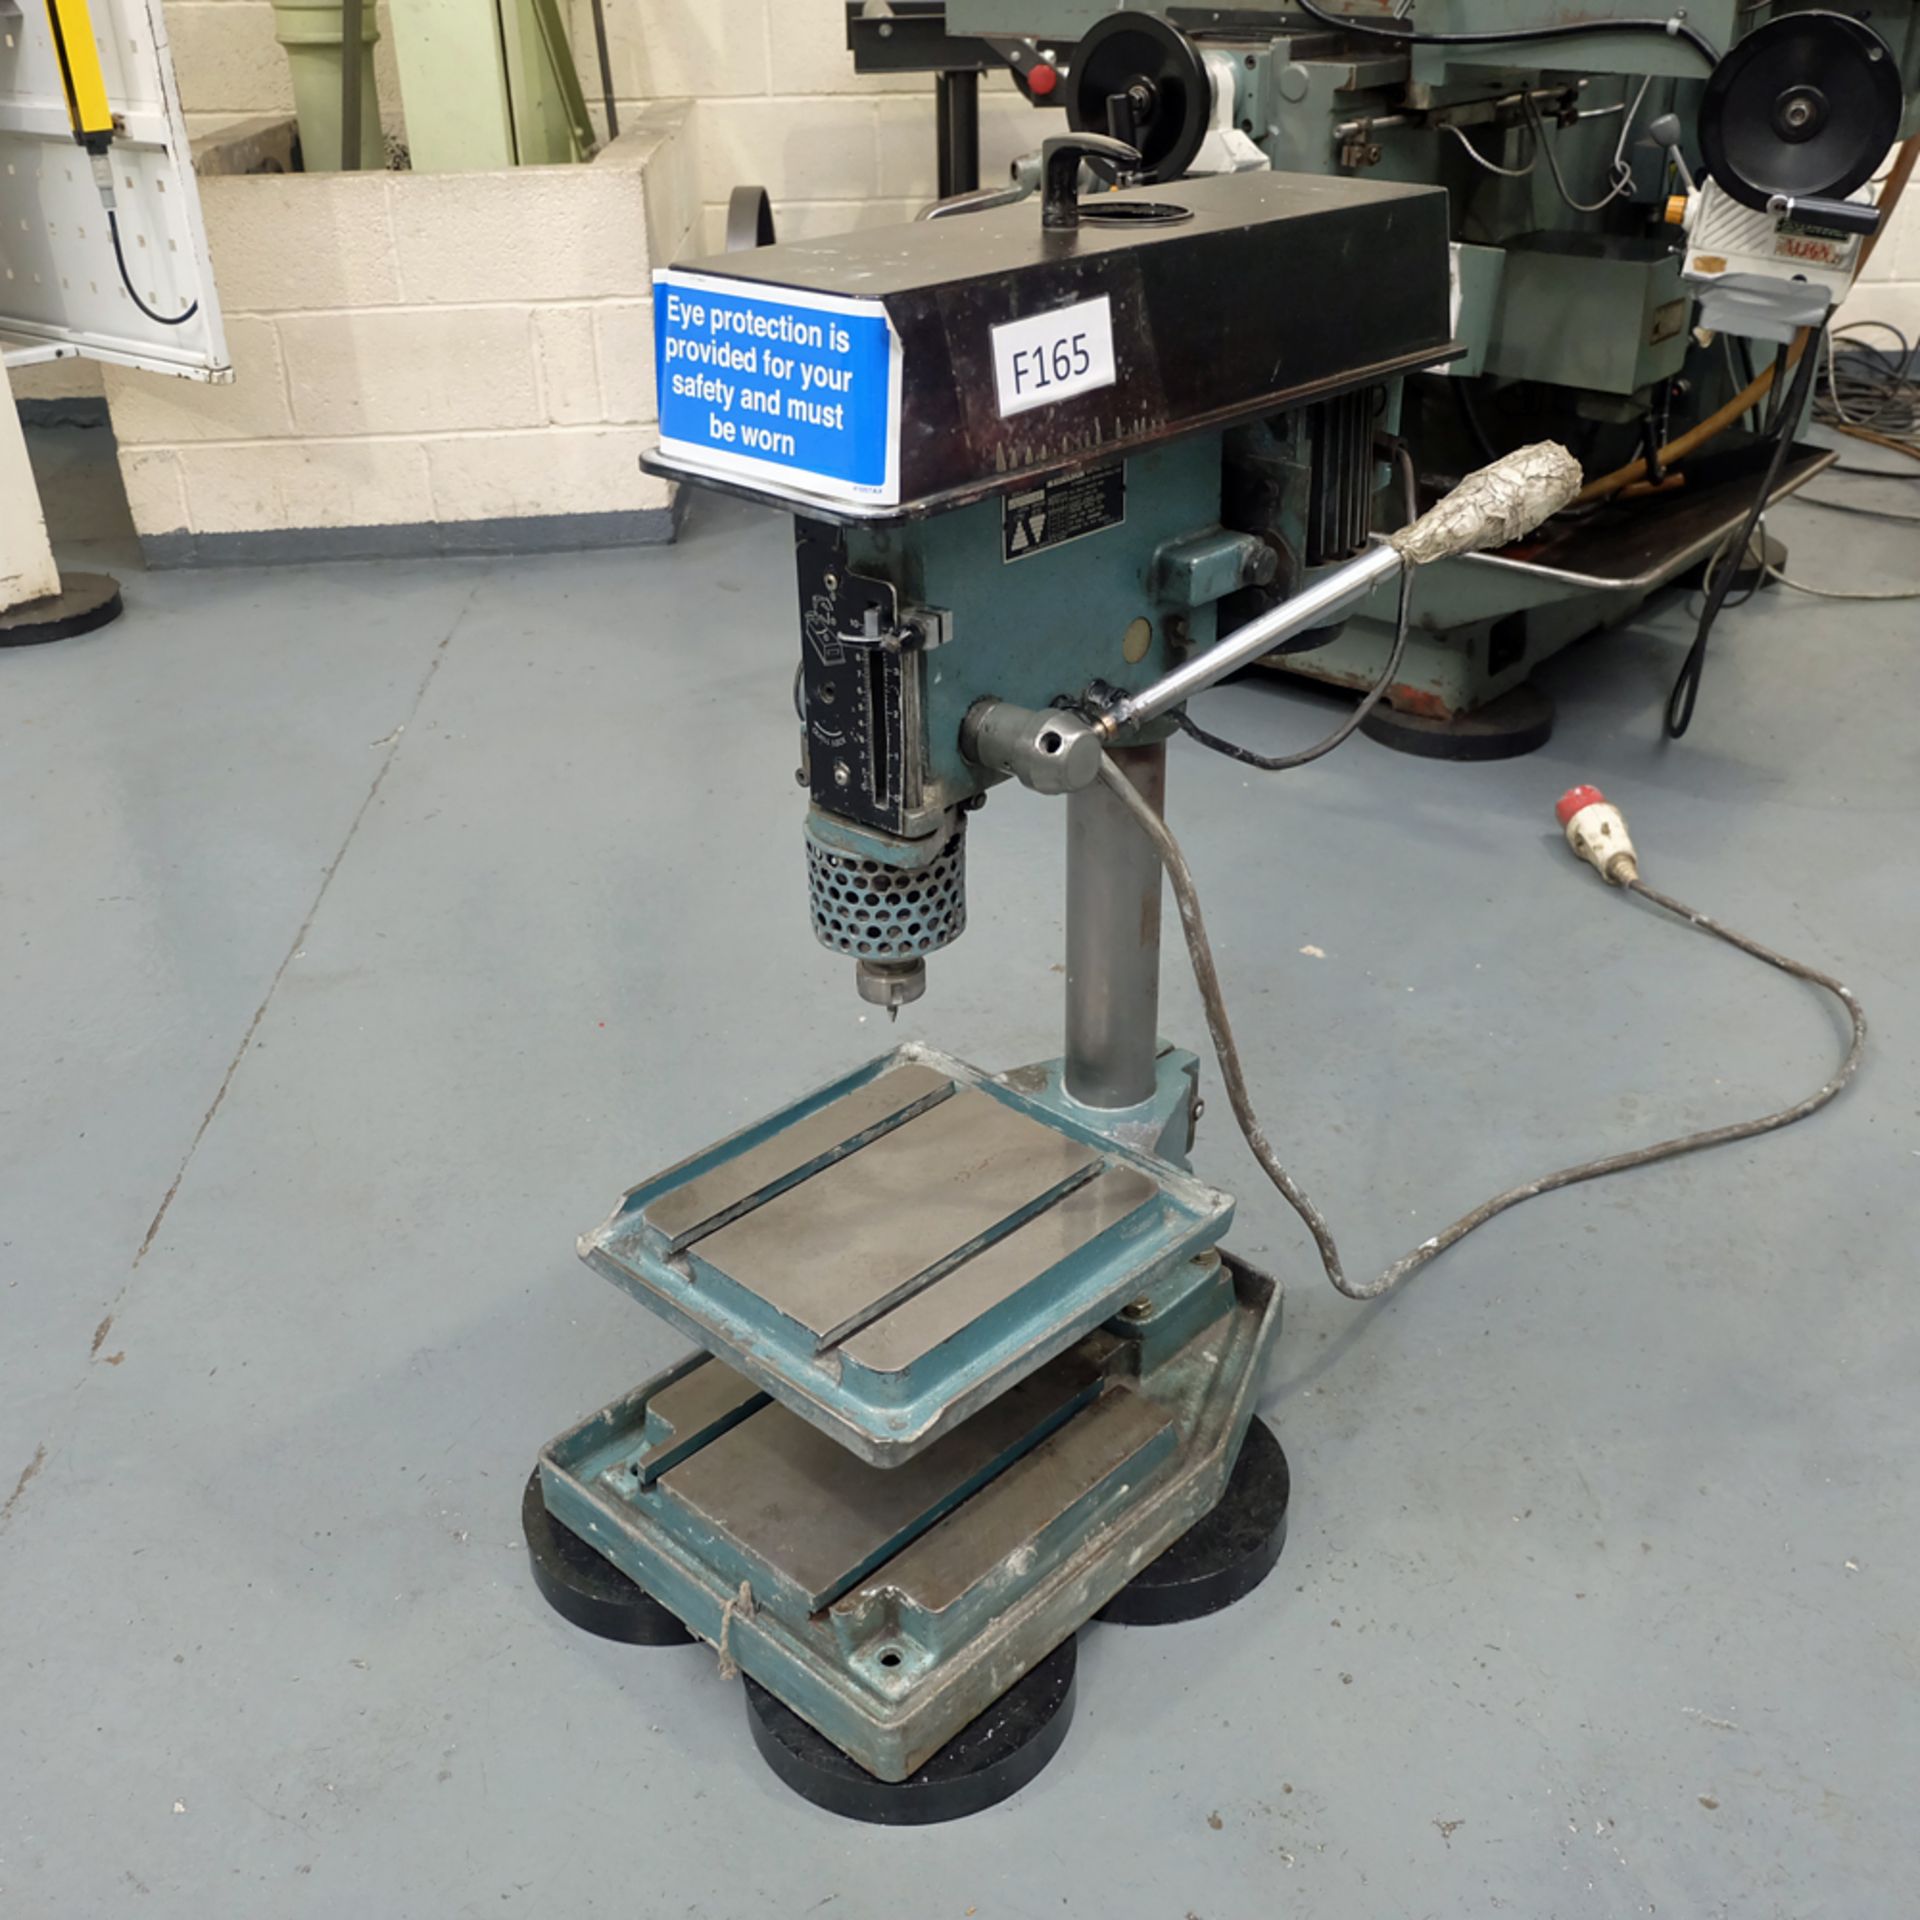 Meddings LF2 Bench Drill. 5 x Spindle Speeds 500 - 4000rpm. Table Size 10" x 11". Motor 3 Phase.